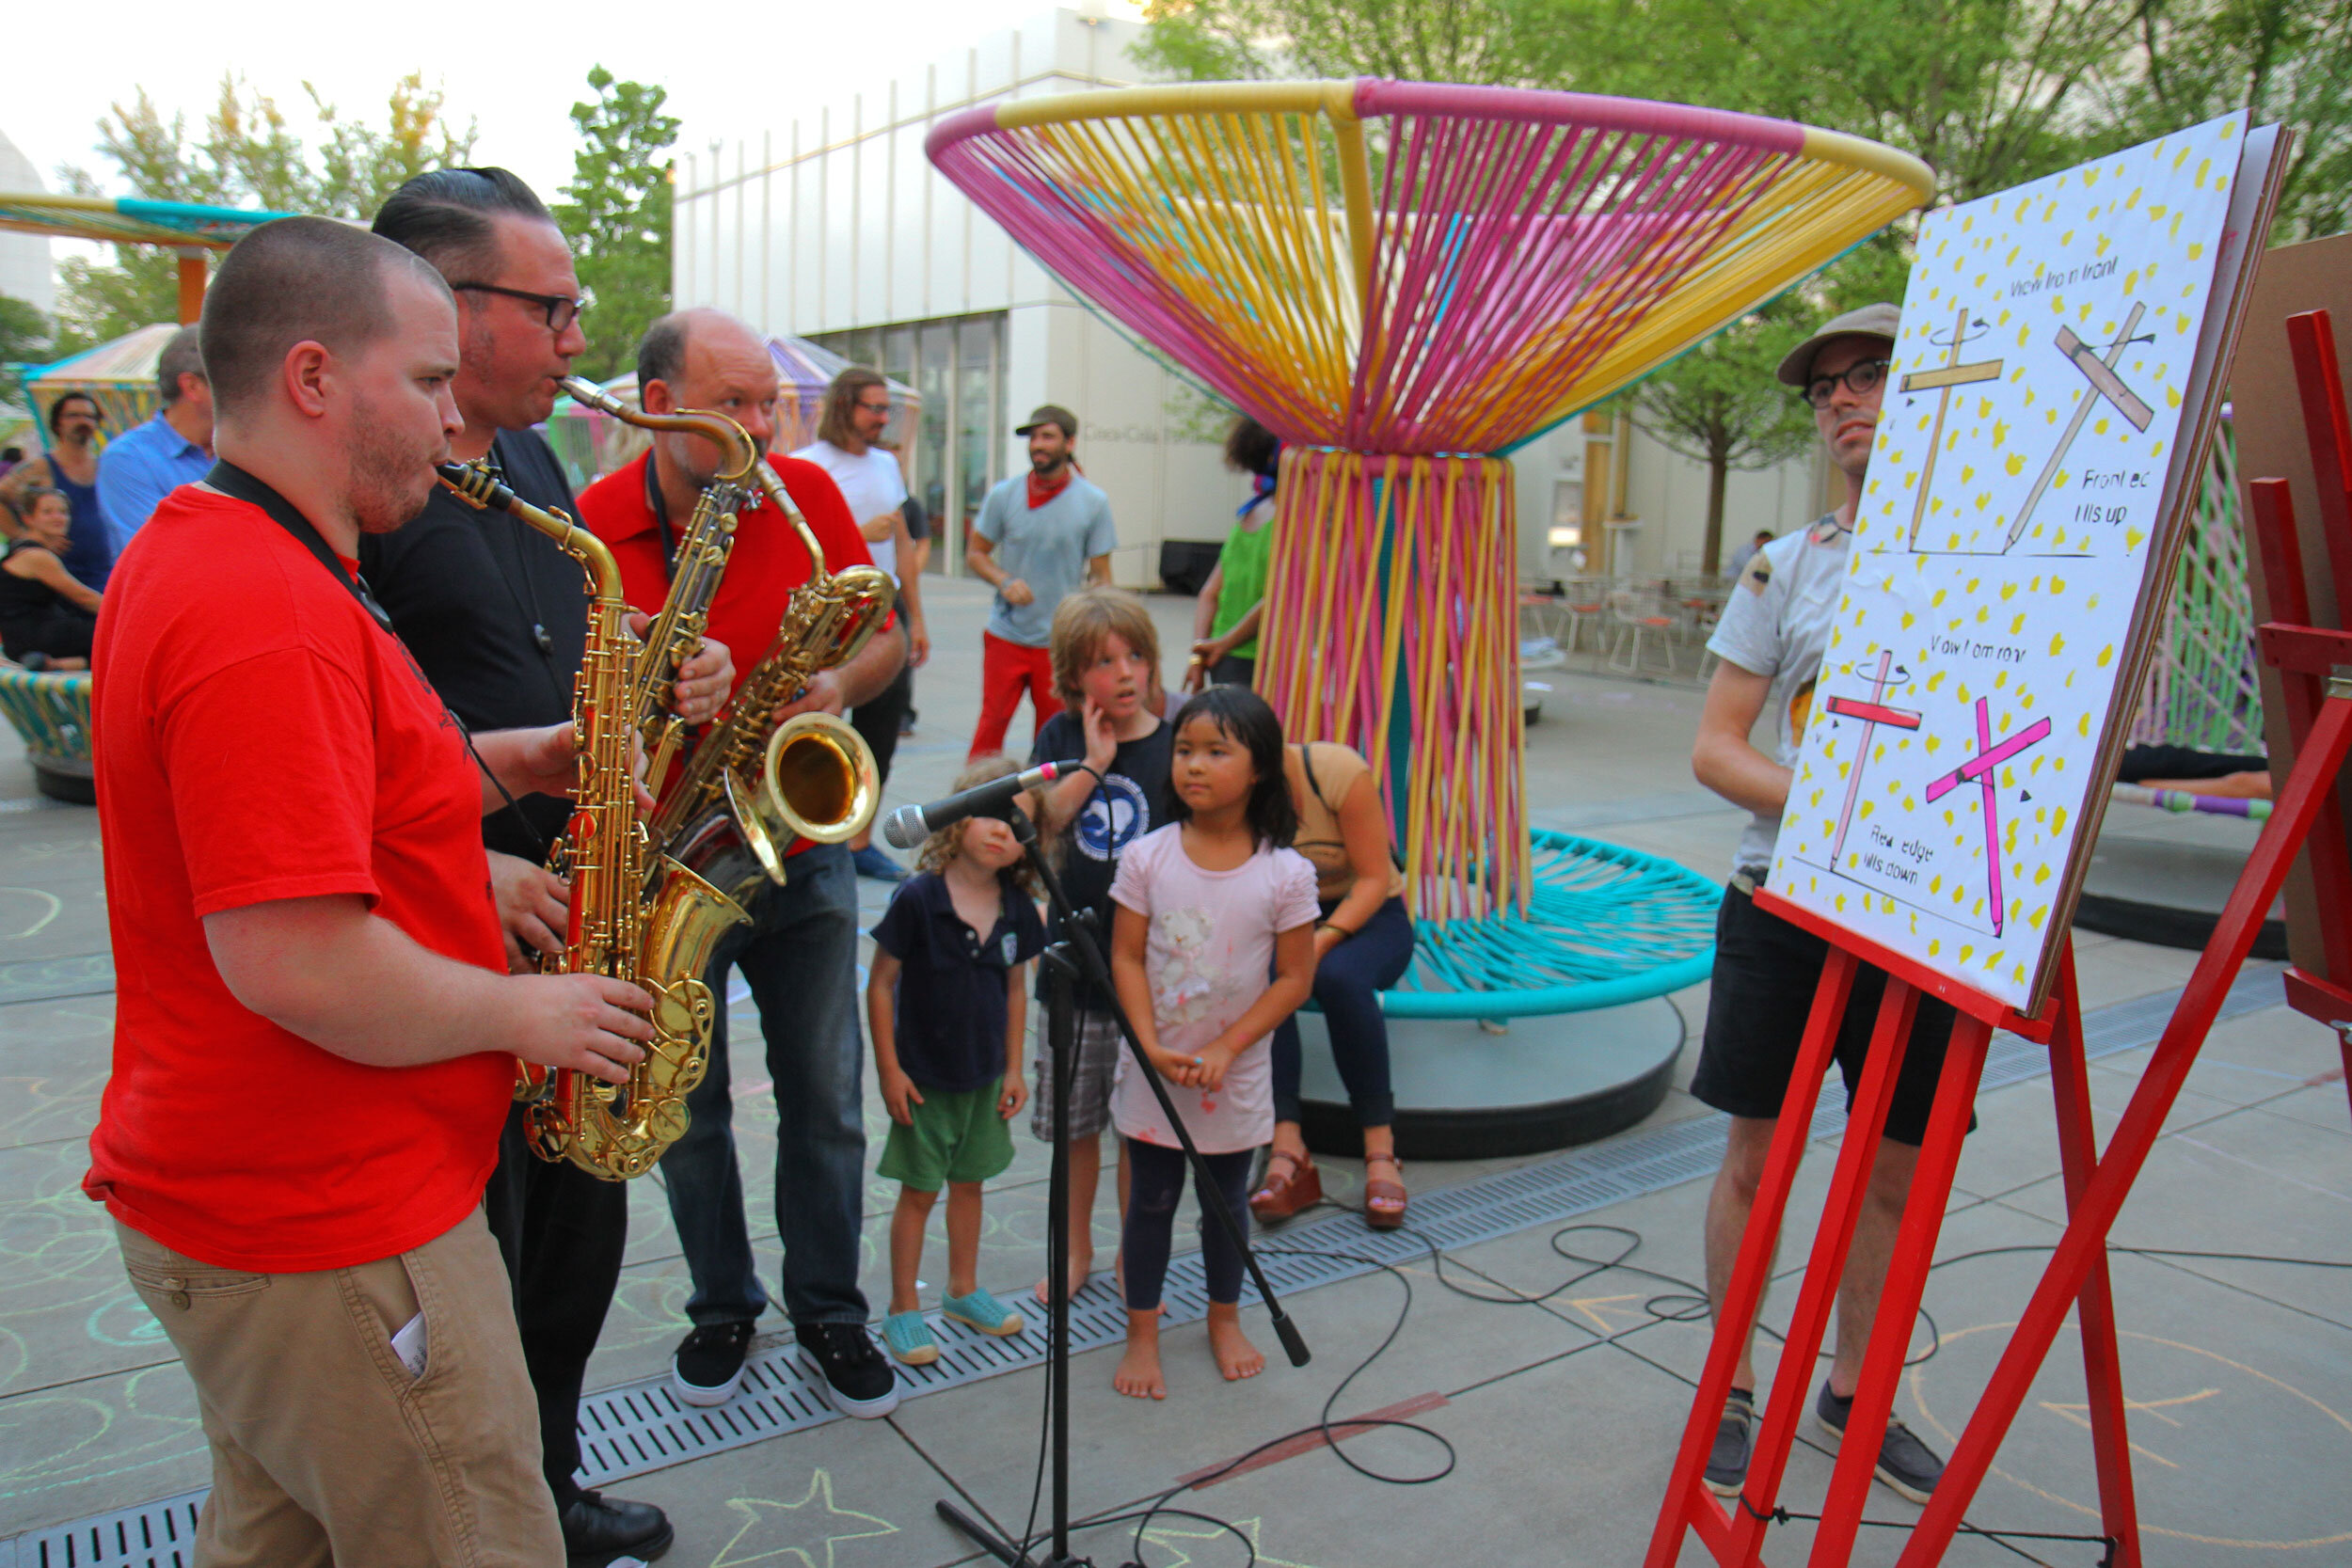 3 musicians with saxophones are looking at a work of art on an easel. A group of children and adults stand by watching them react to the art.